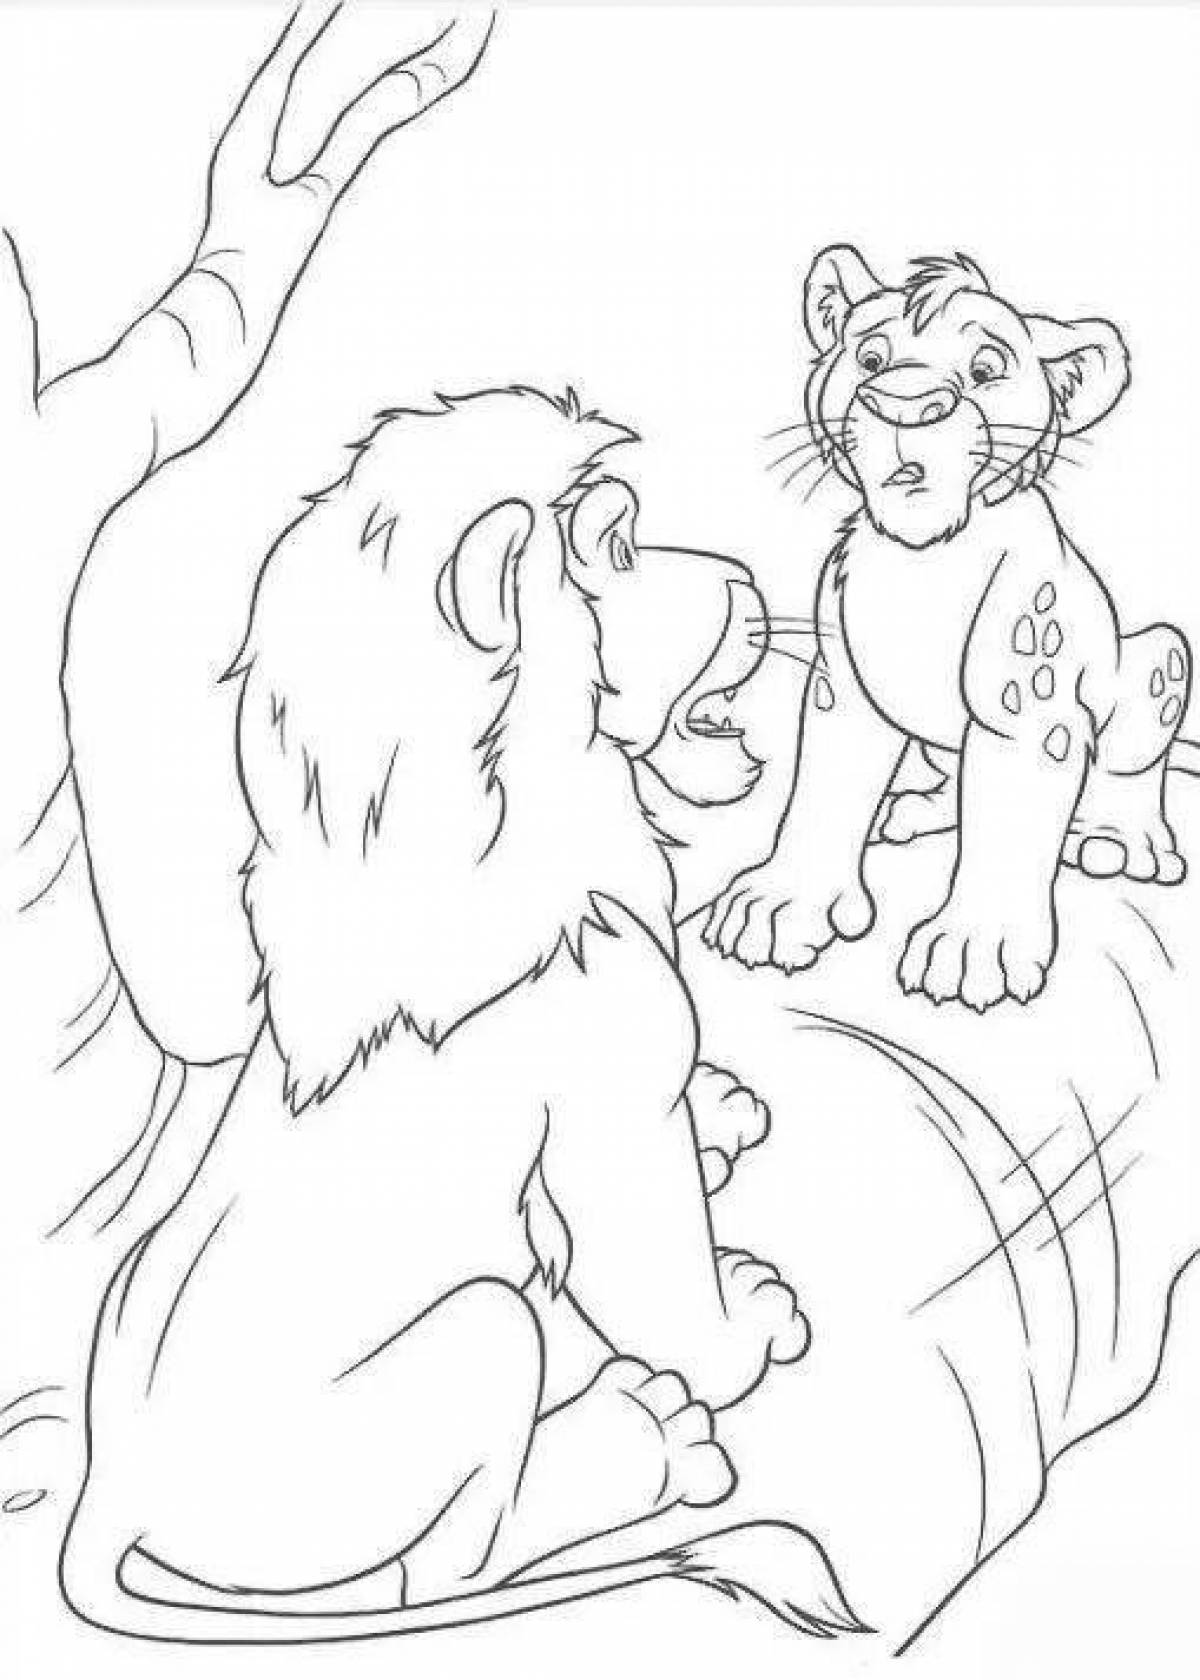 Playful big adventure coloring page